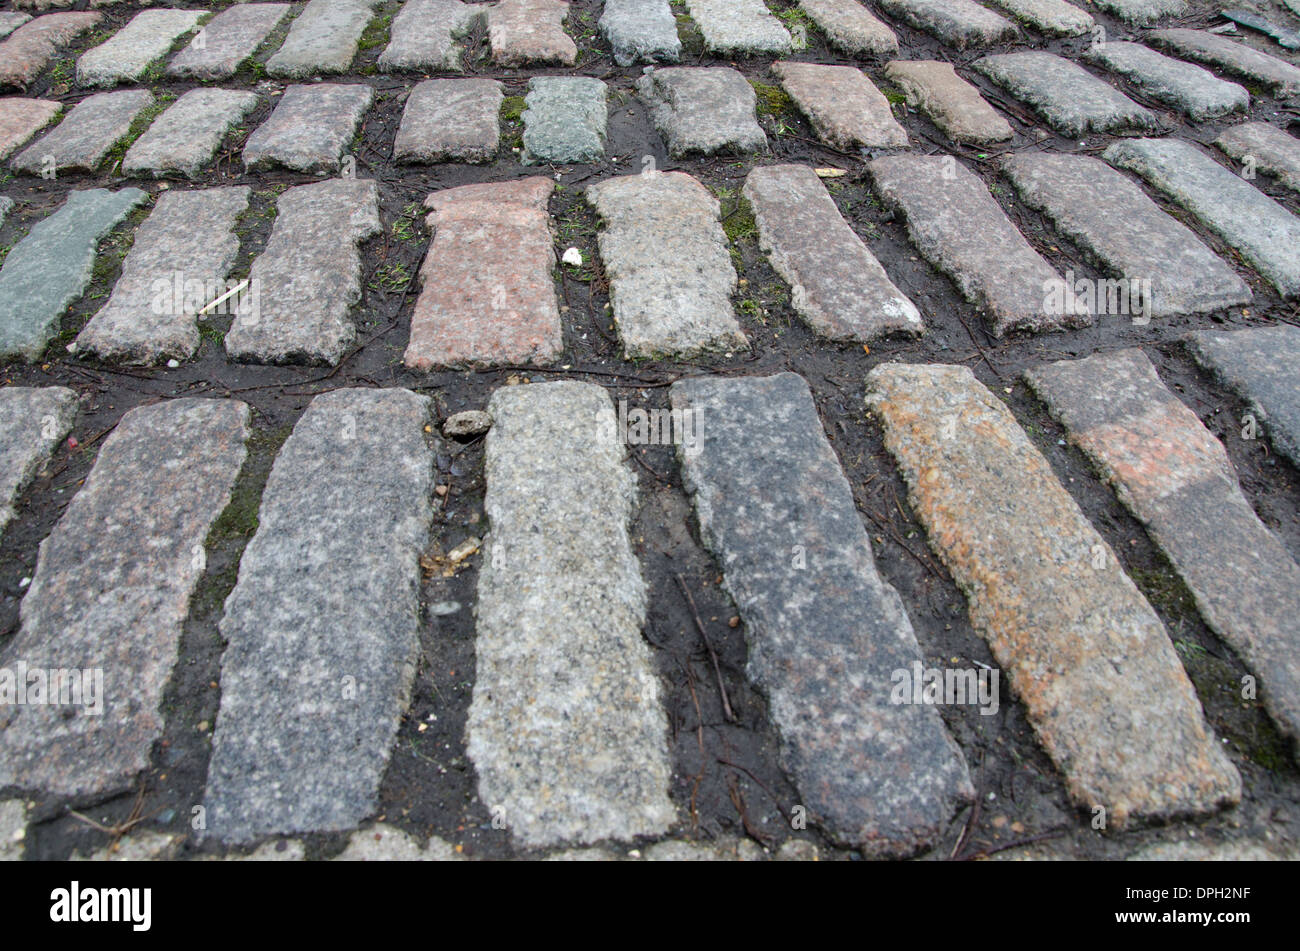 Stone cobbles laid out in regular rectangular pattern Stock Photo